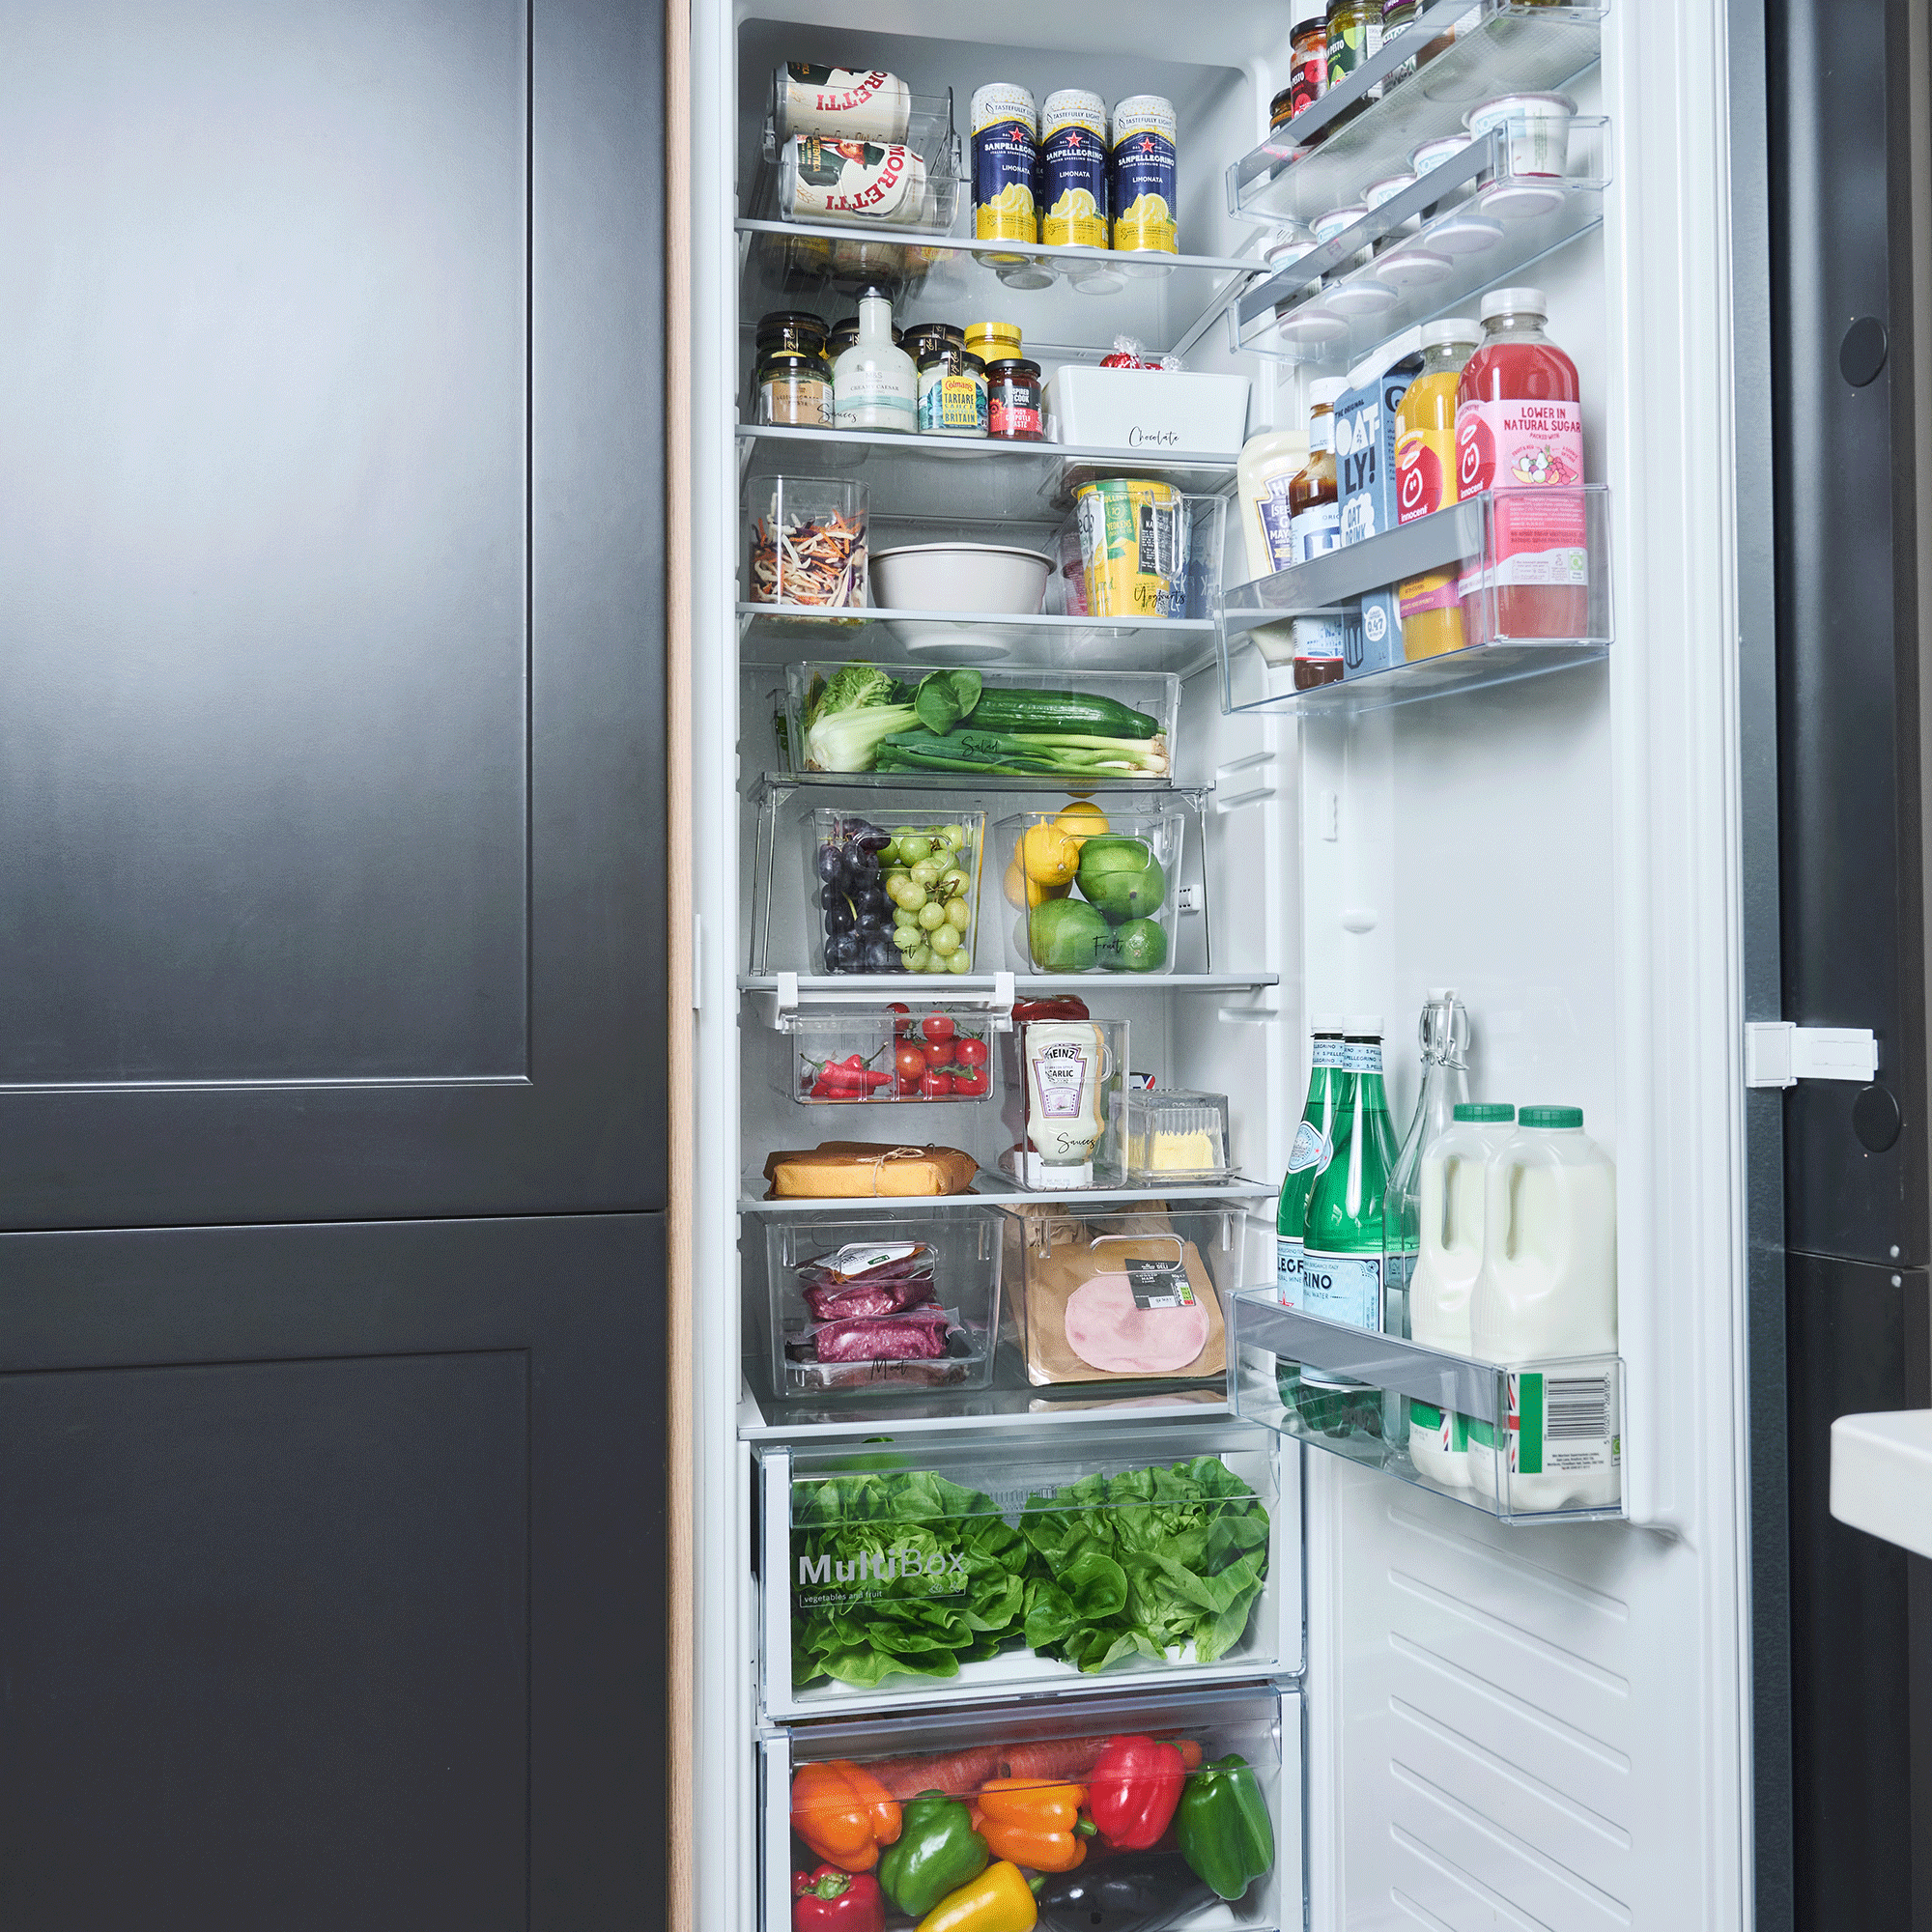 This is the temperature your fridge should be set at - and how to stop it from getting warmer